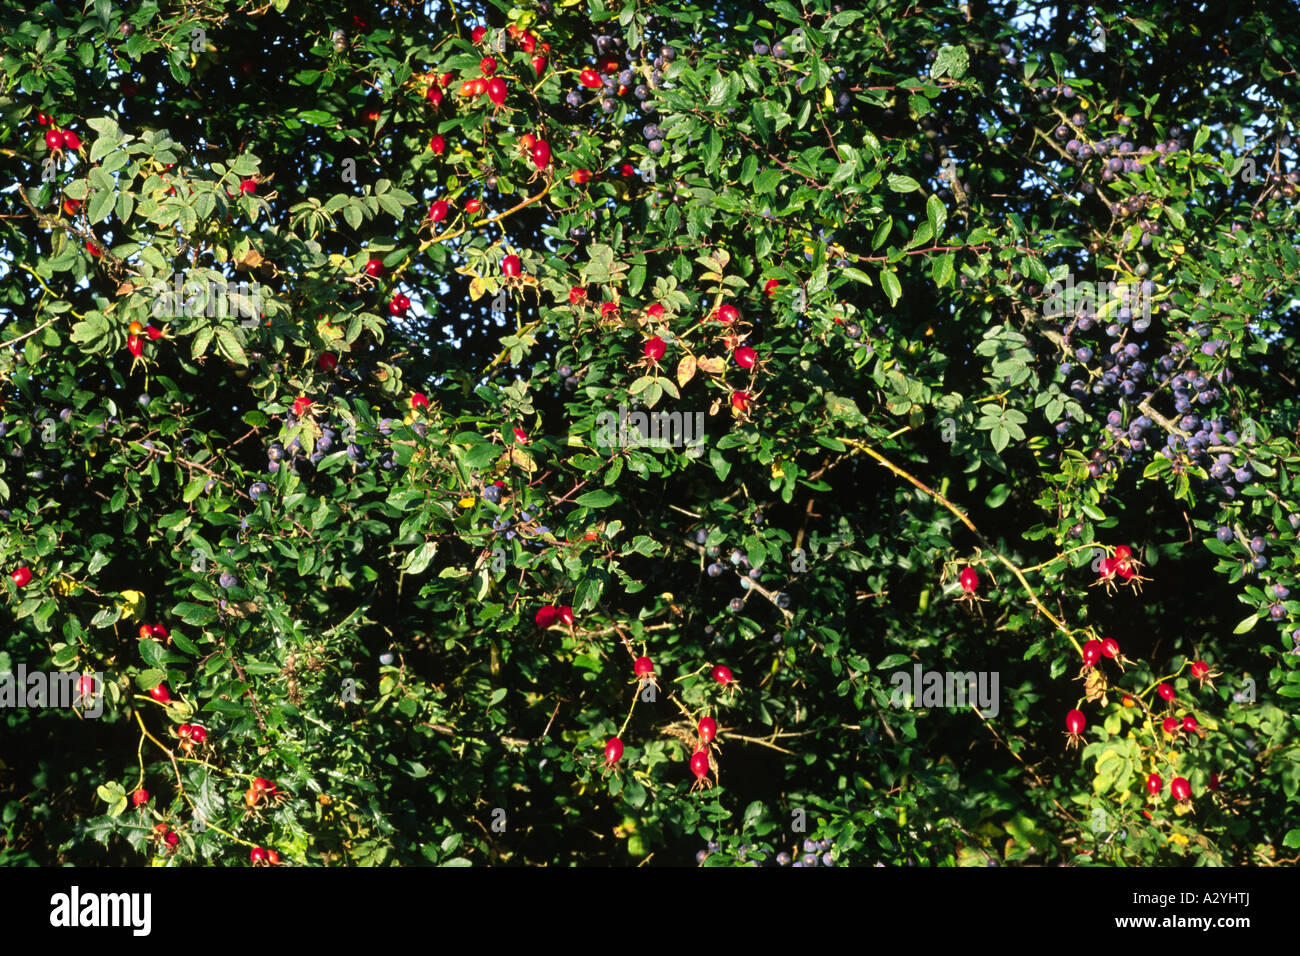 Rosehips of Sherard's Downy Rose (Rosa sherardii) and Sloes the fruits of Blackthorn (Prunus spinosa) in a hedge. Stock Photo